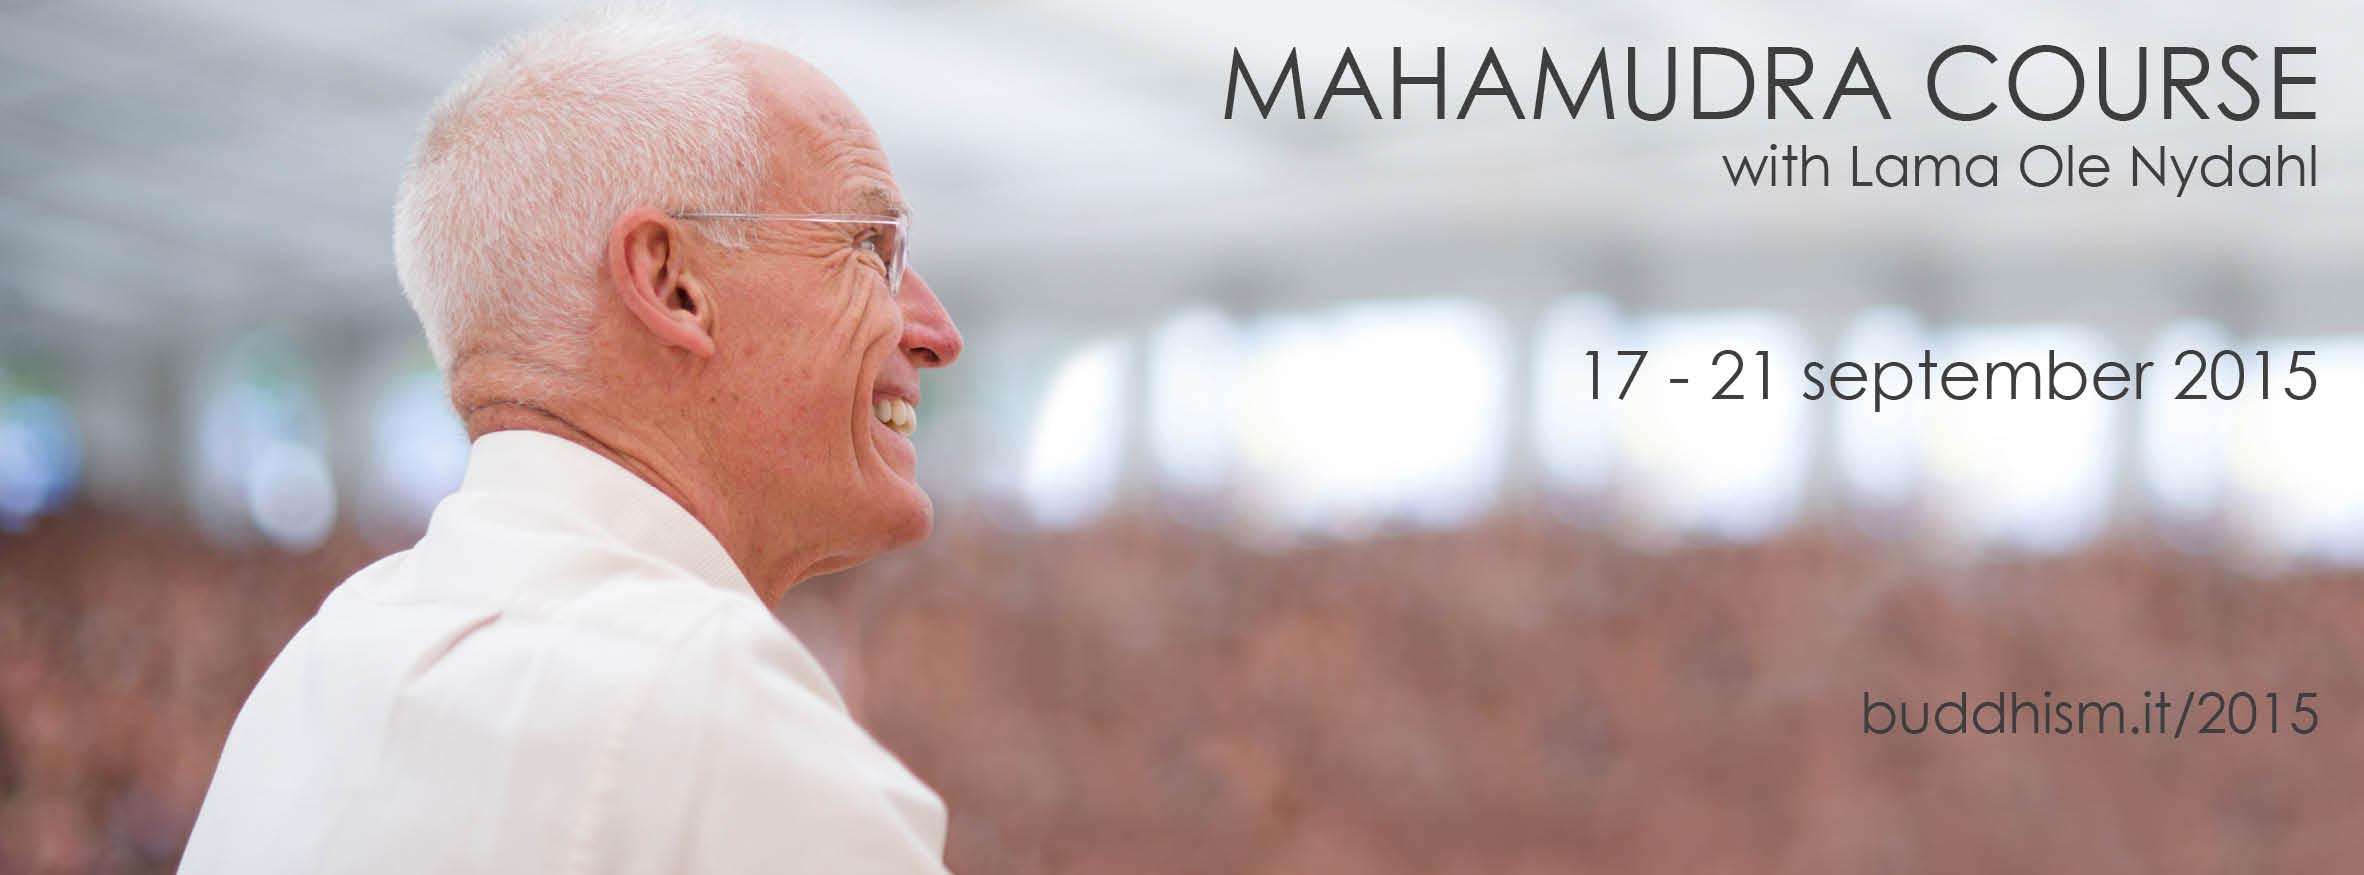 Meditation Course with Lama Ole Nydahl in Italy